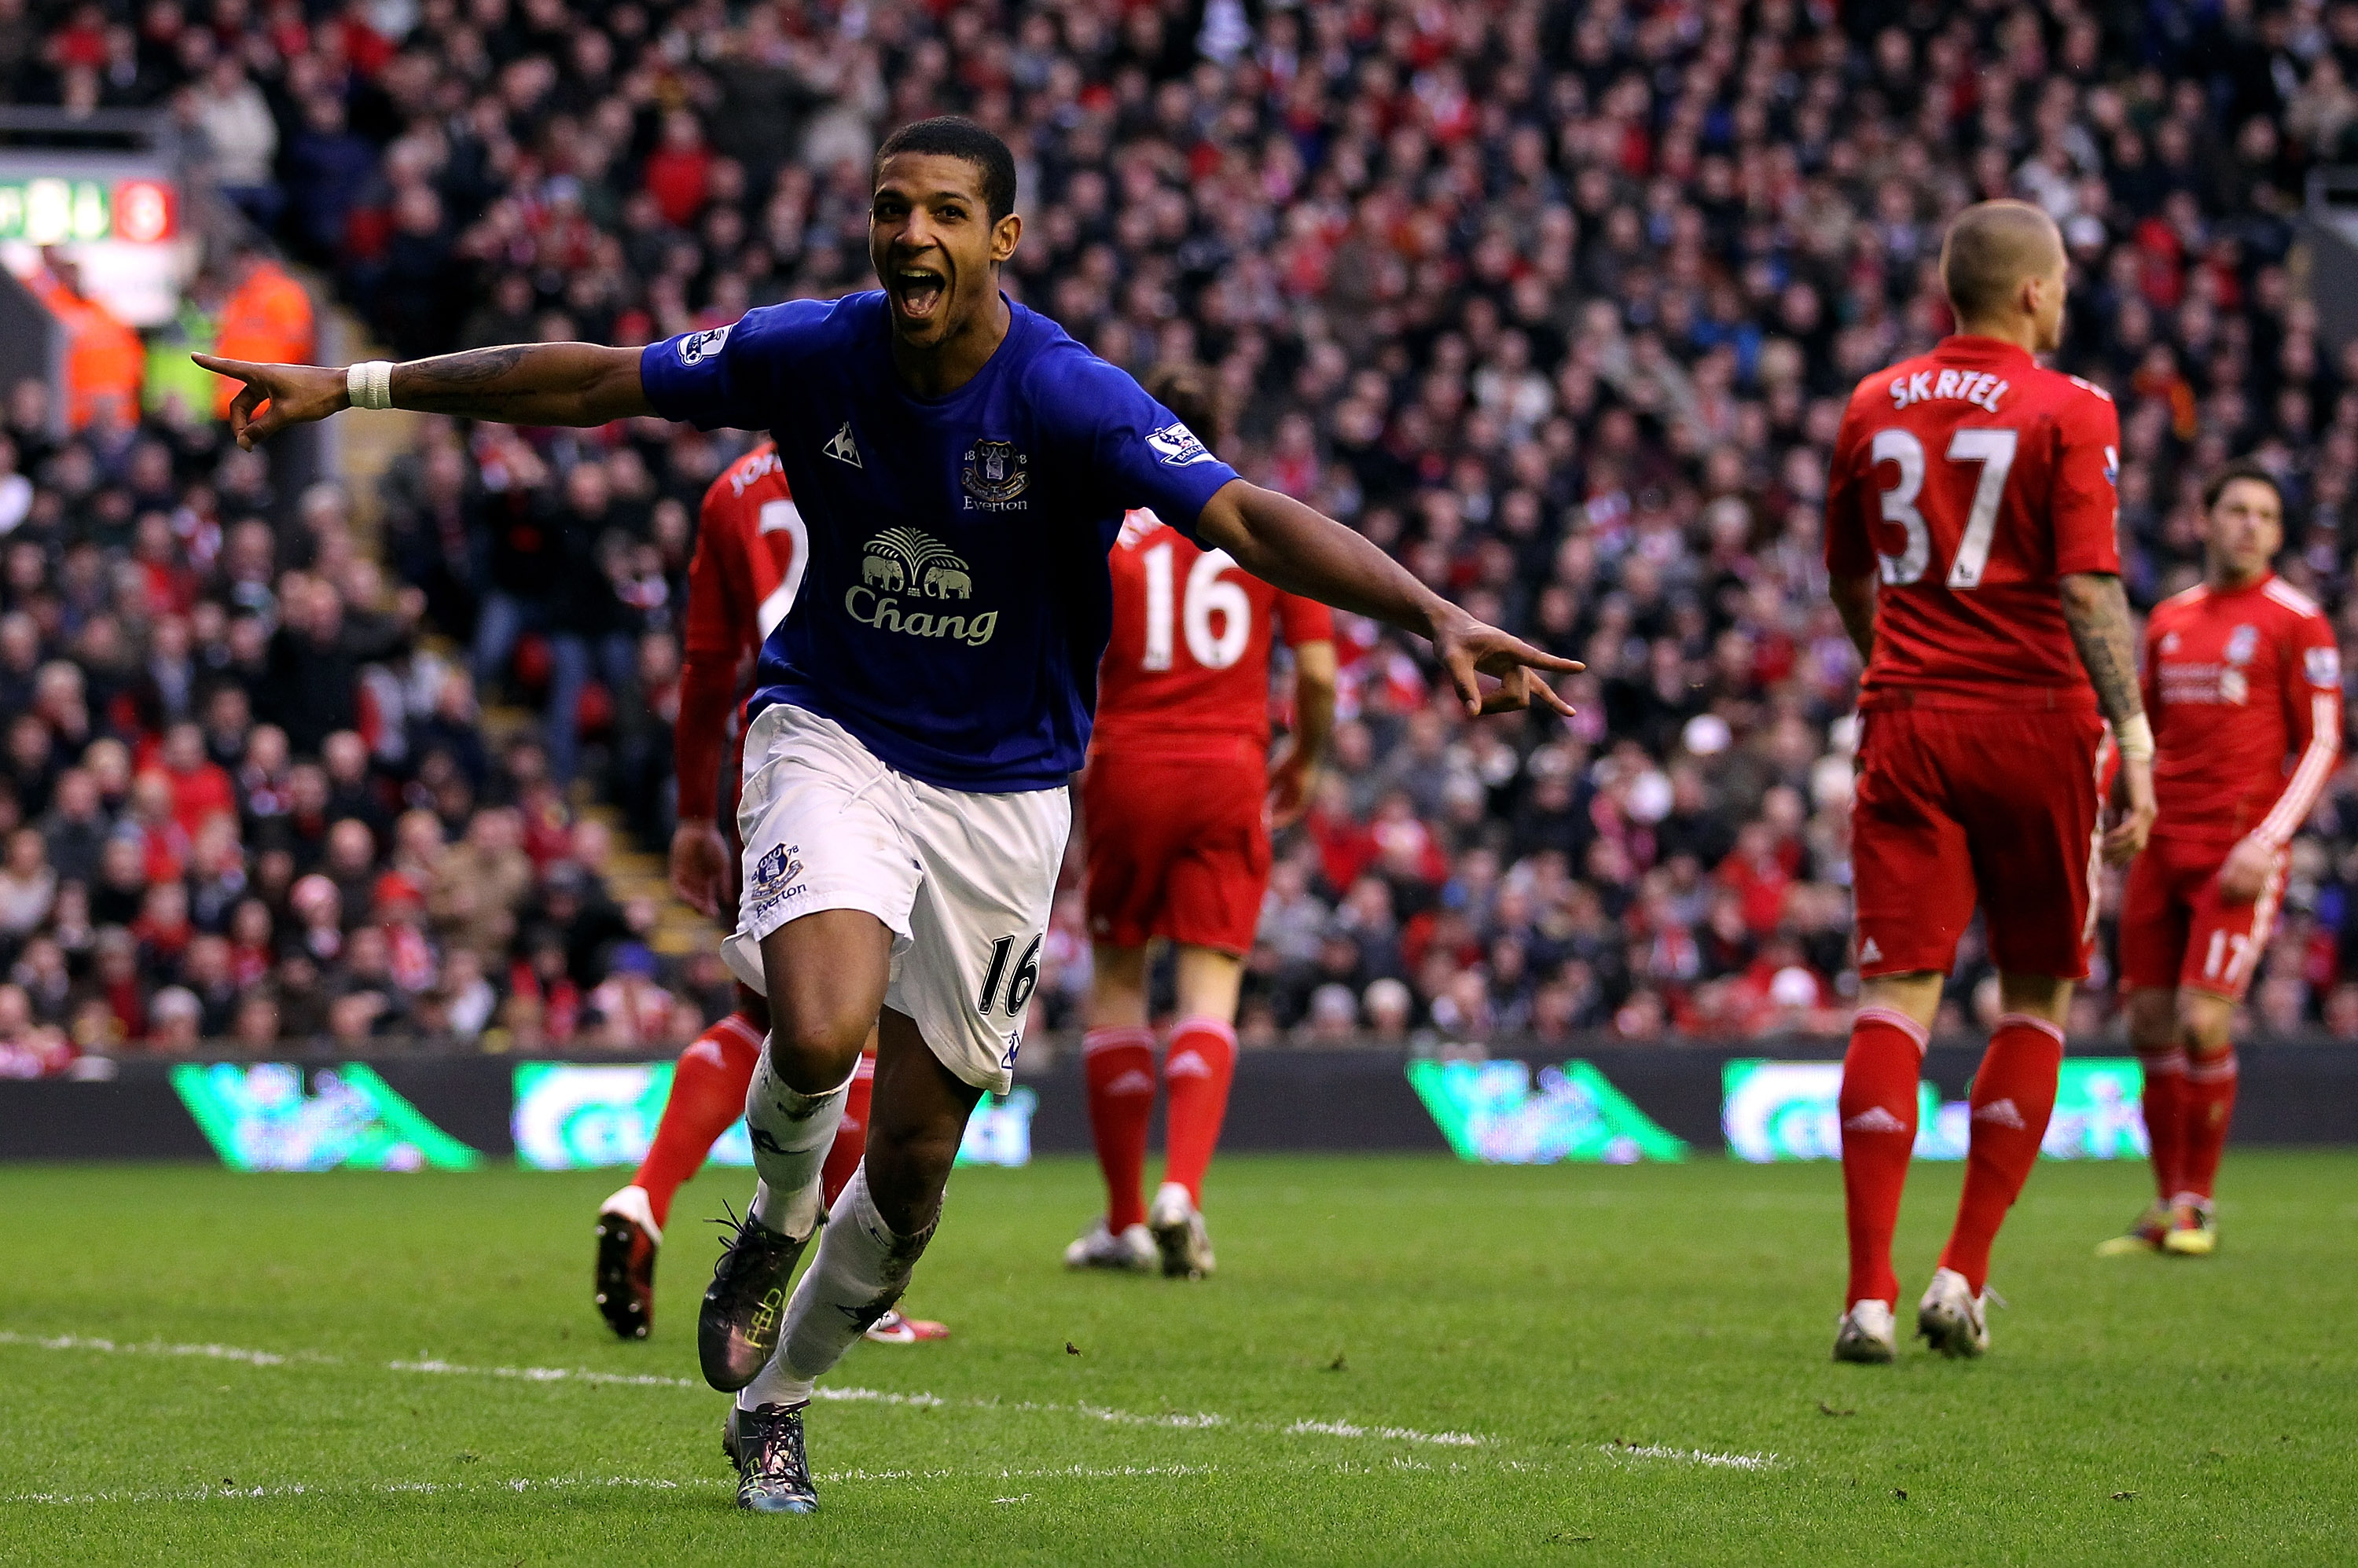 LIVERPOOL, ENGLAND - JANUARY 16:  Jermaine Beckford of Everton celebrates scoring his team's second goal during the Barclays Premier League match between Liverpool and Everton at Anfield on January 16, 2011 in Liverpool, England.  (Photo by Alex Livesey/G